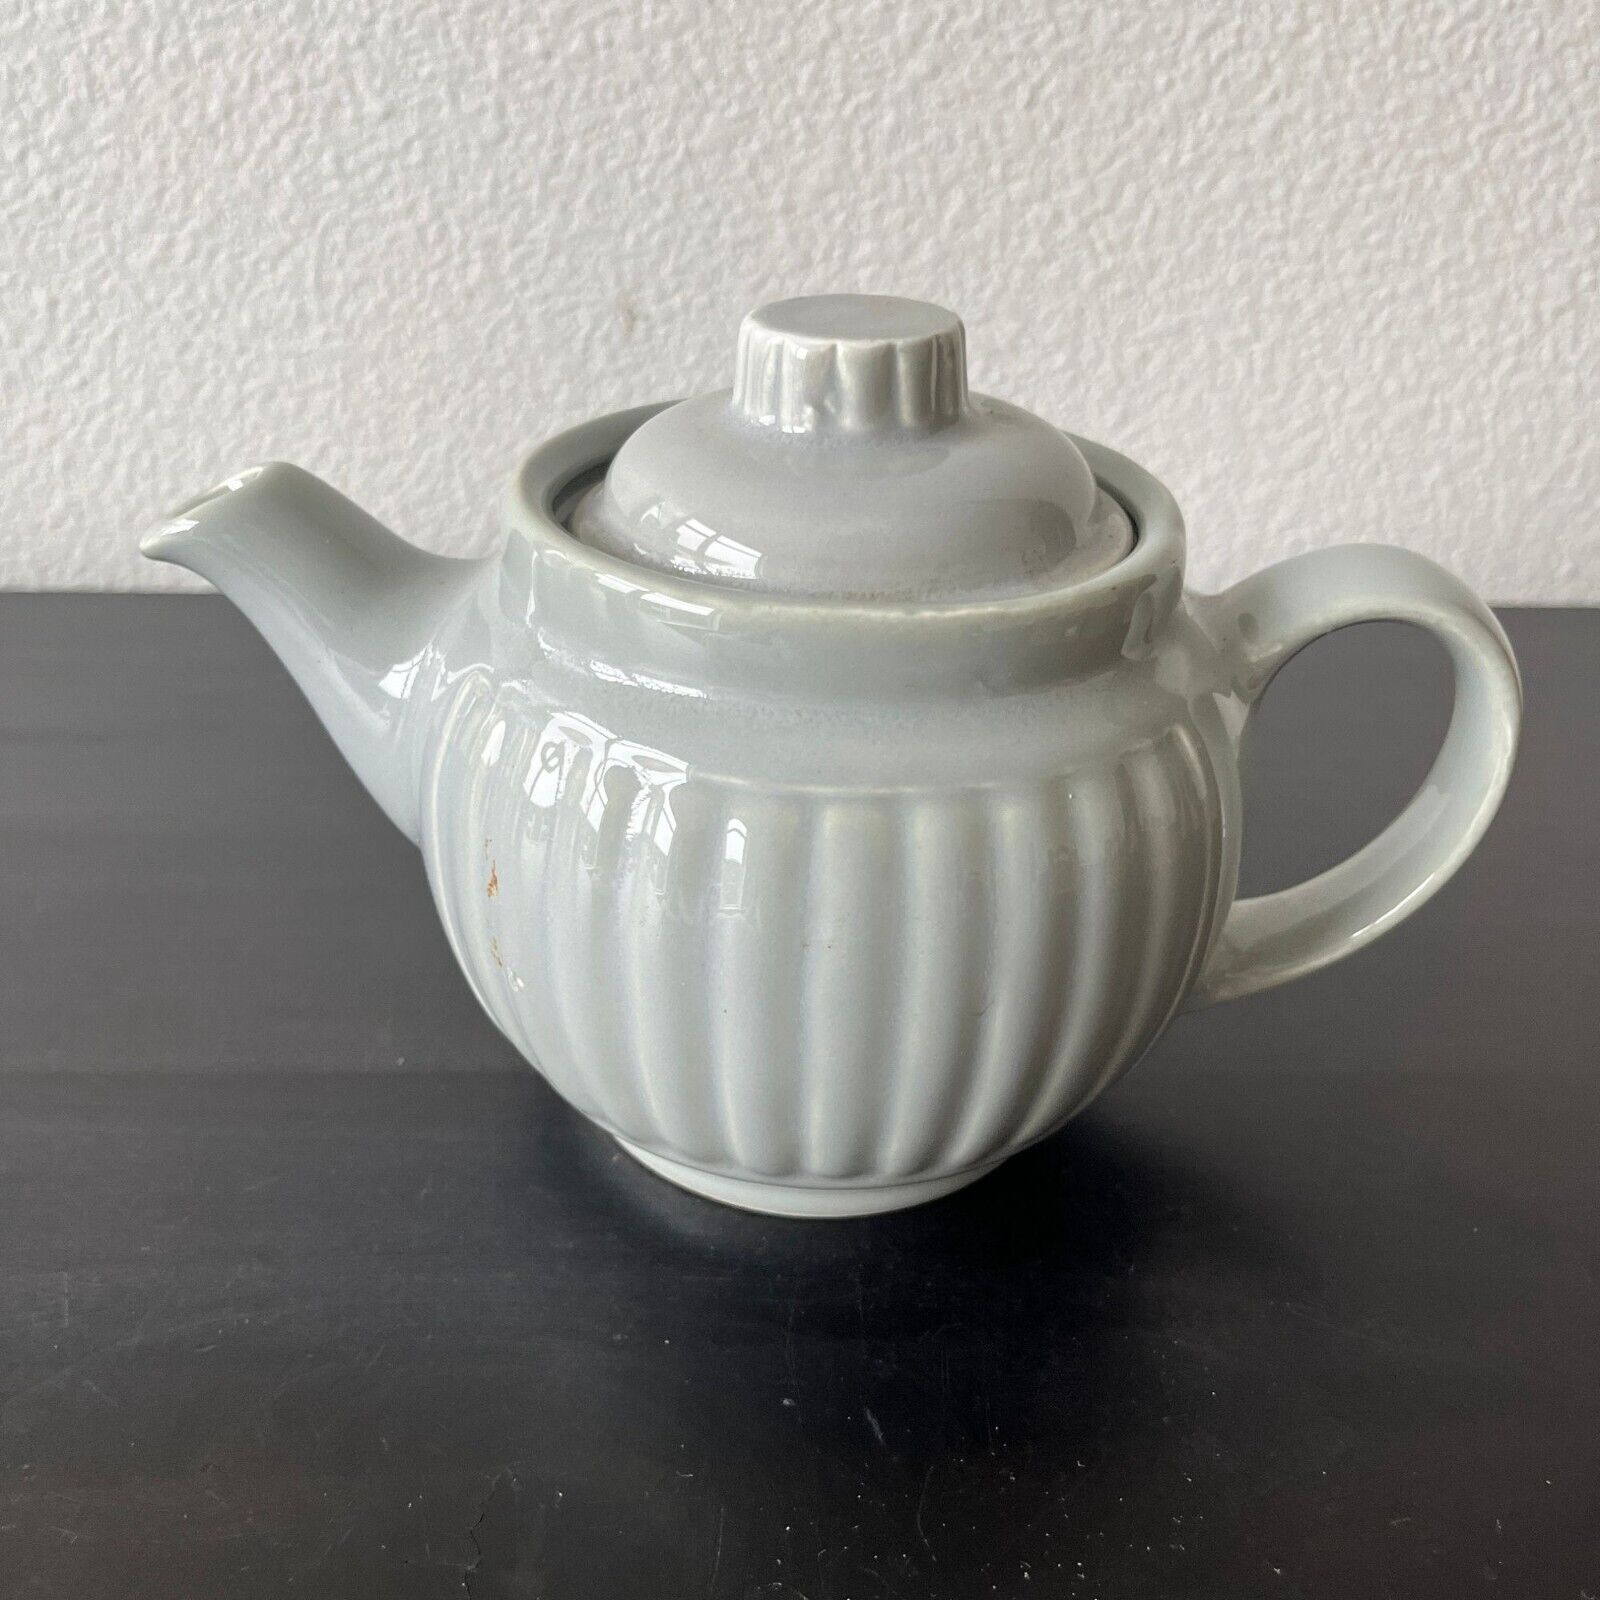 MCM Gray Teapot with Ceramic Filter Ribbed Design 2 Cup Size